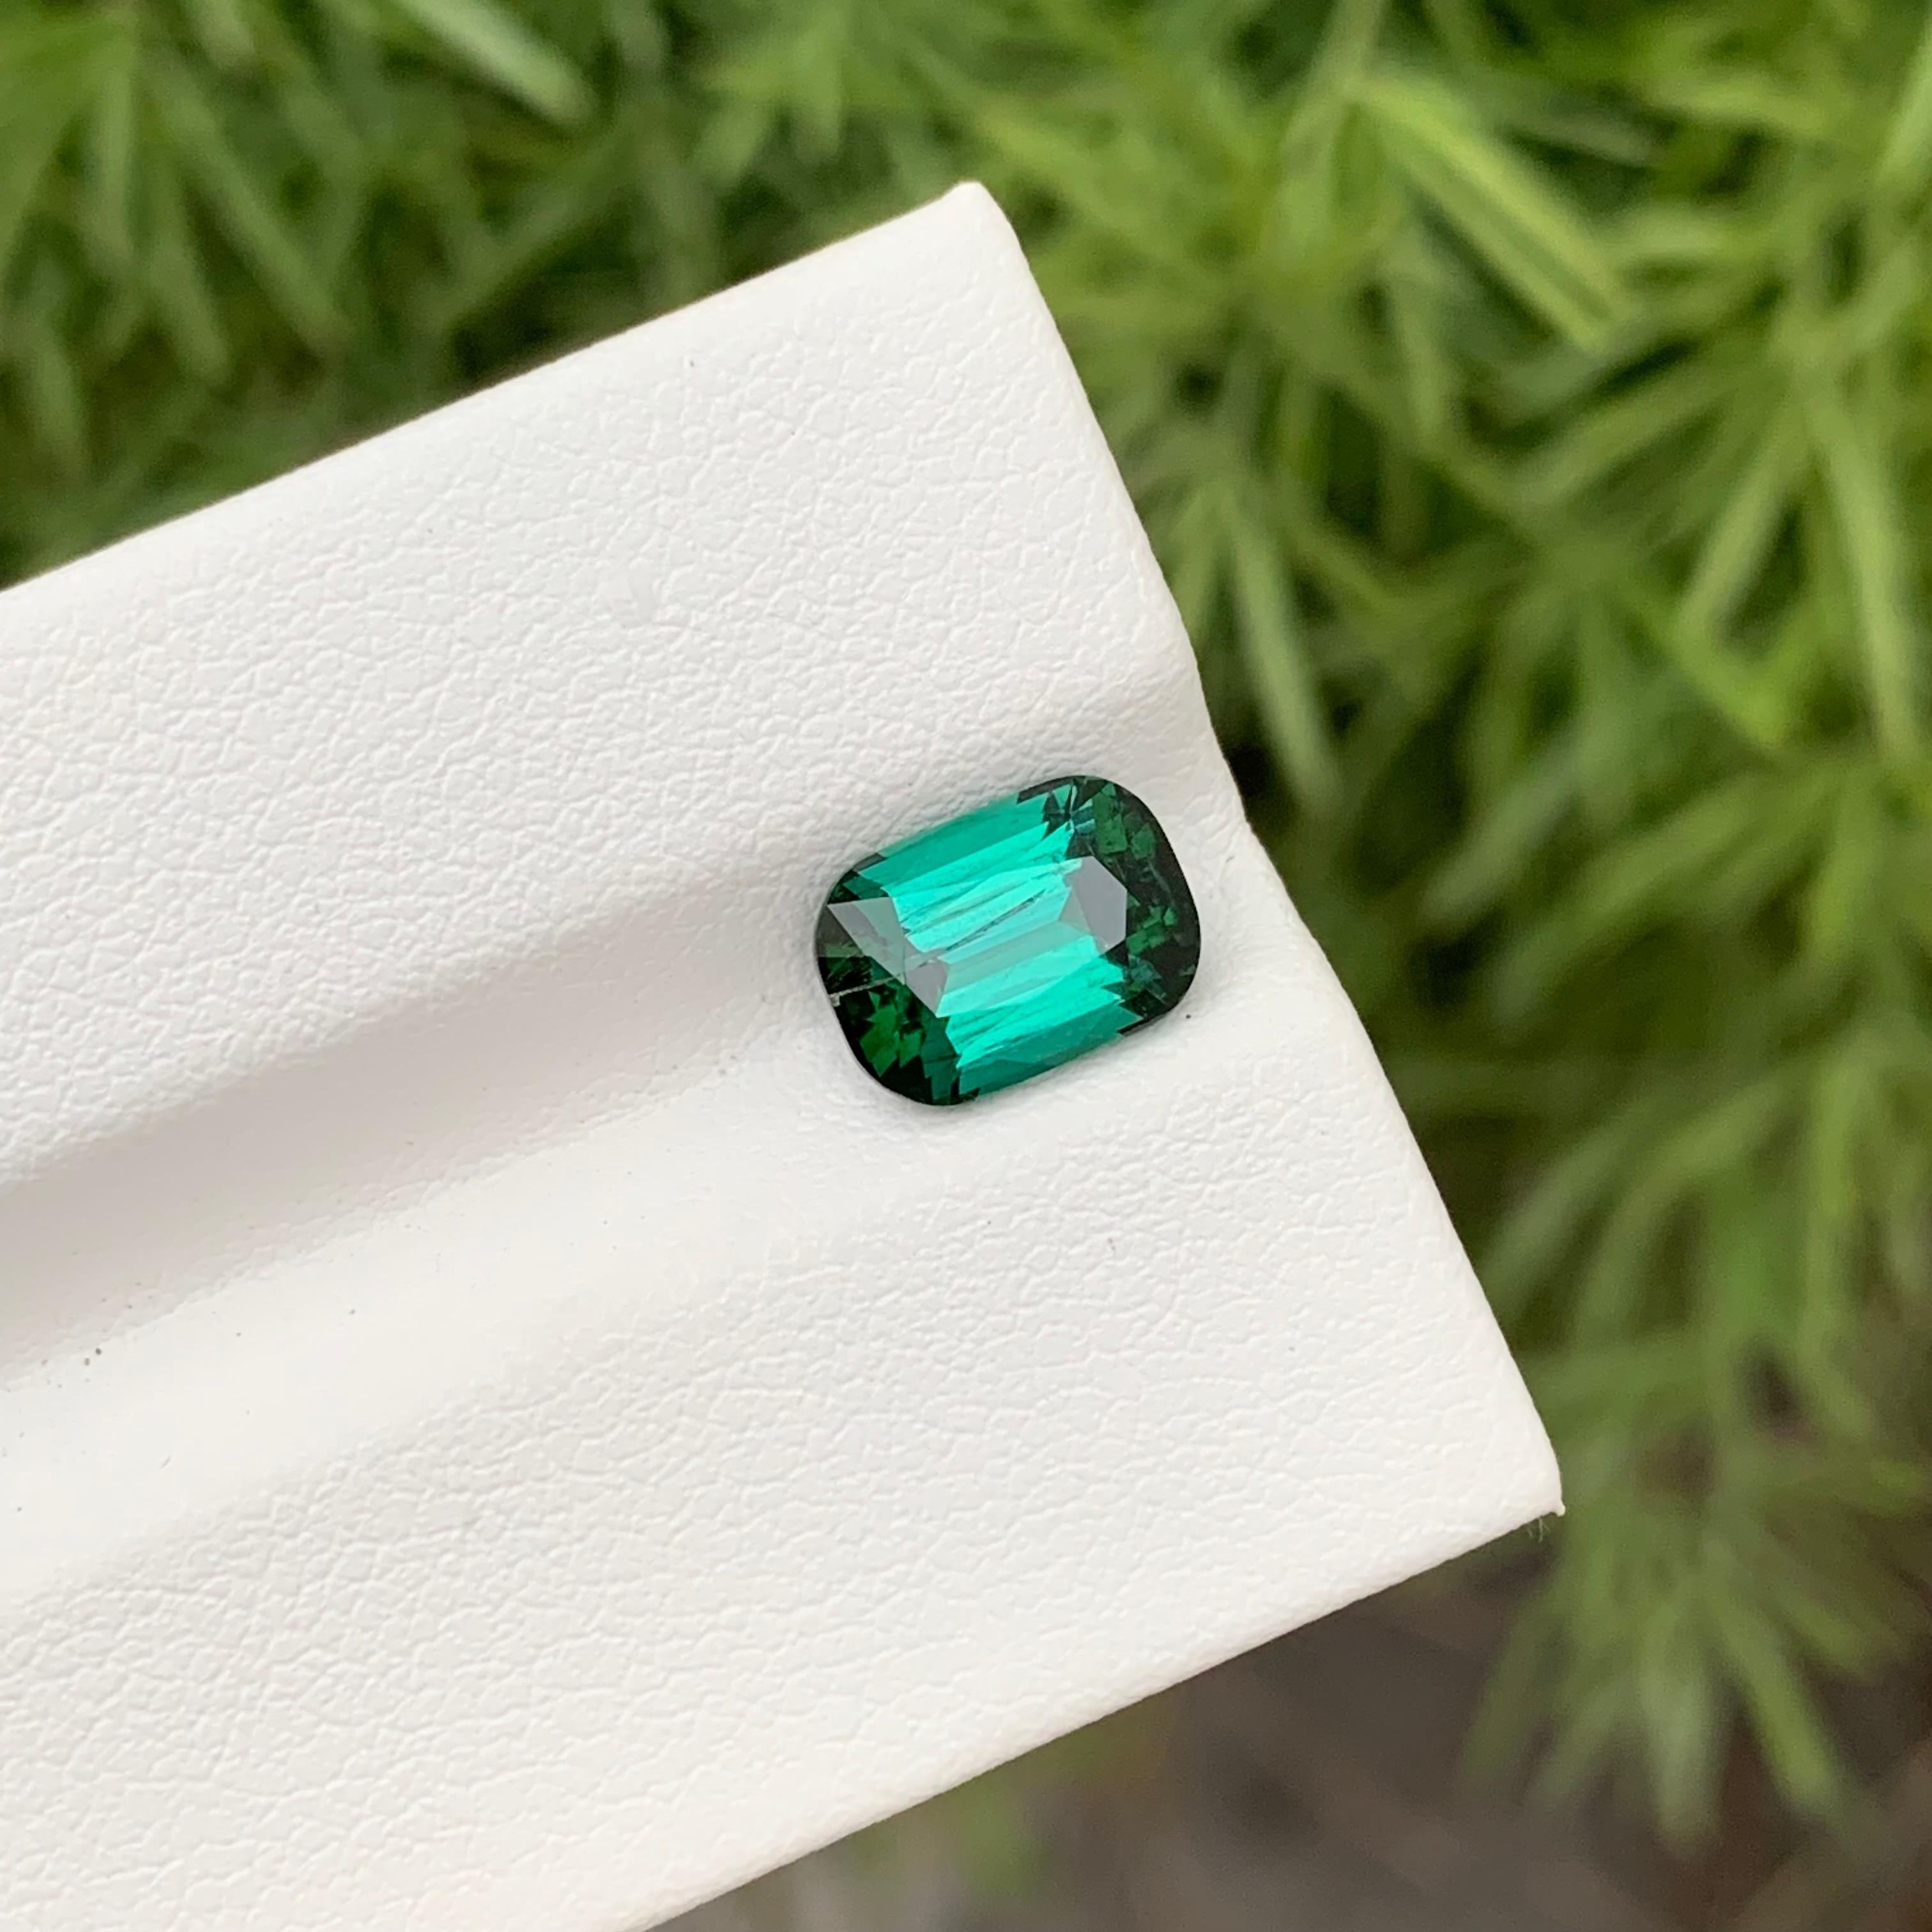 Loose Lagoon Shade Tourmaline
Weight: 2.25 Carats
Dimension: 8.9 x 6.3 x 5.1 Mm
Origin: Afghanistan
Treatment: Non
Certificate: On Demand
Shape: Cushion

Lagoon tourmaline, a captivating gemstone named for the tranquil and mesmerizing colors found